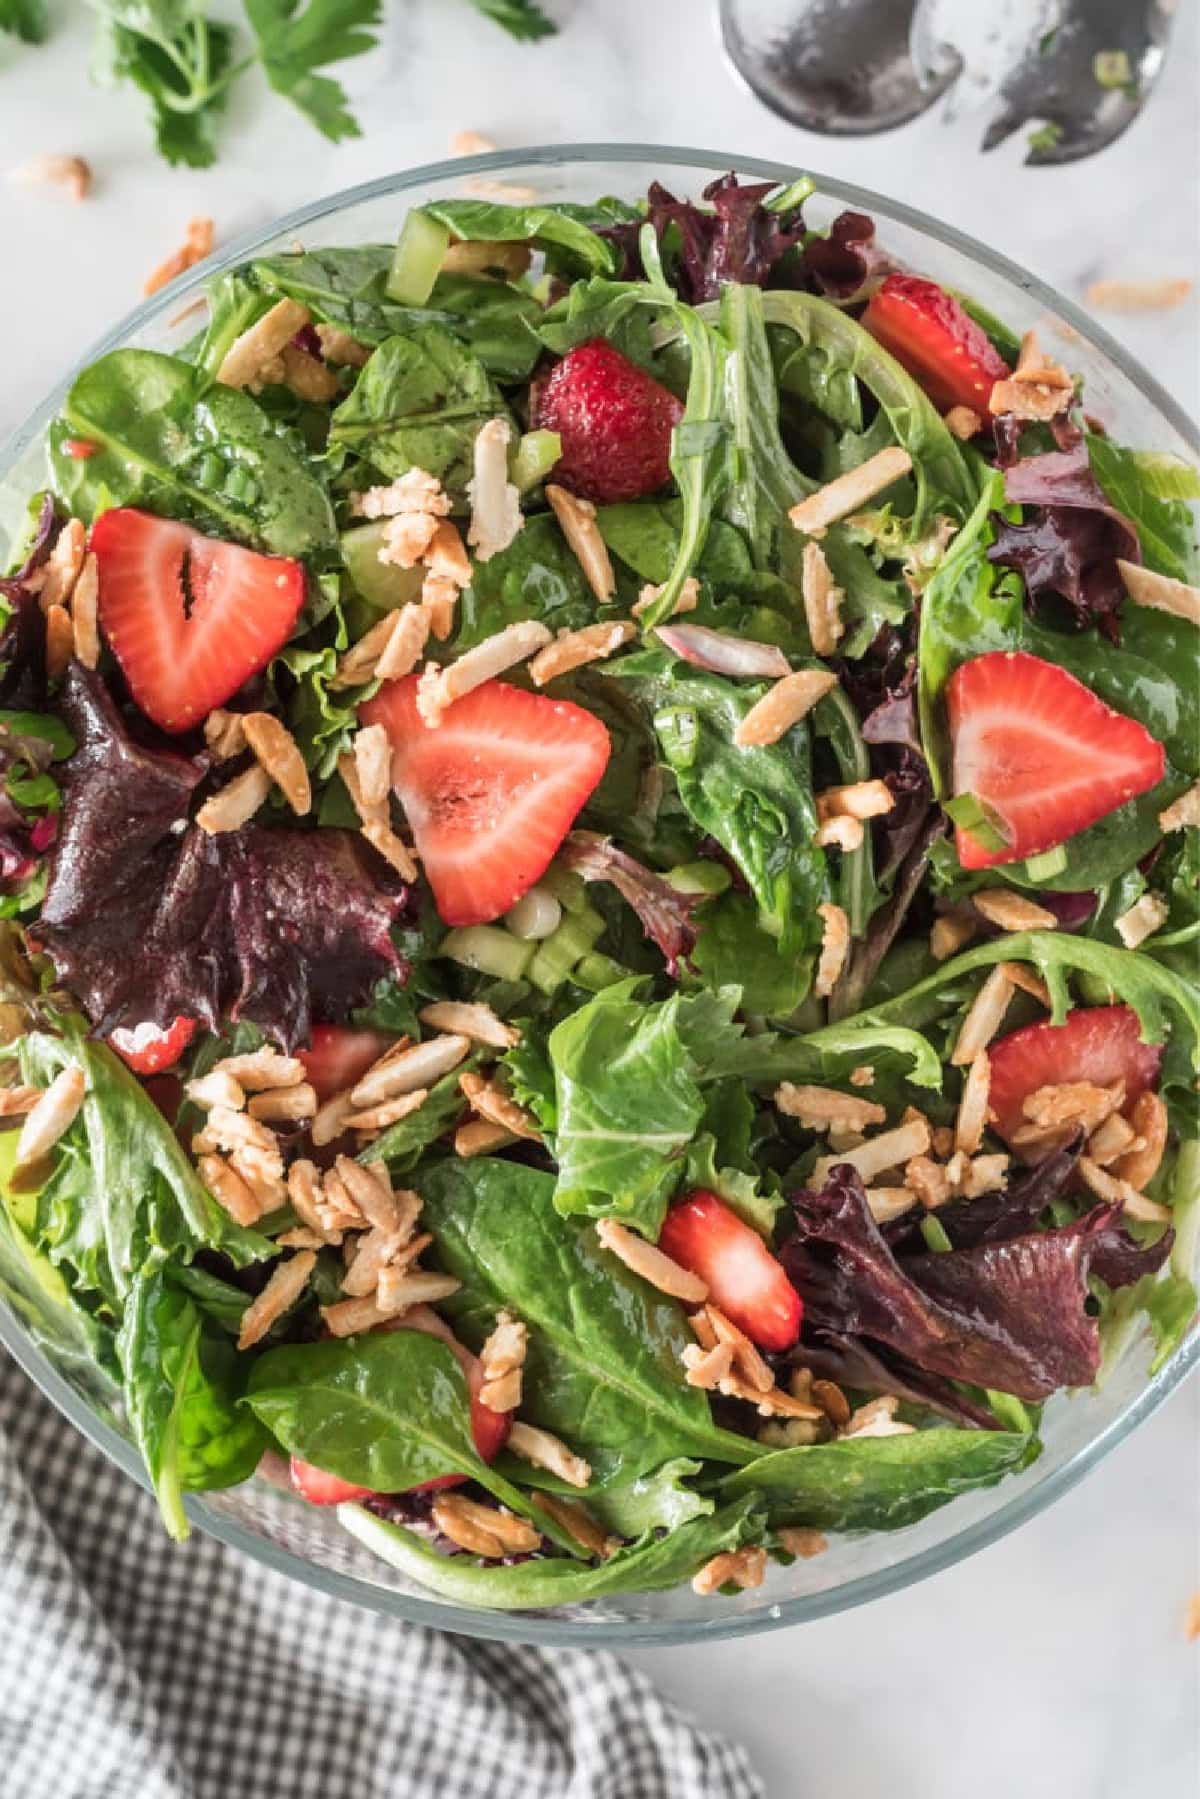 bowl of baby greens with strawberries and sugared almonds